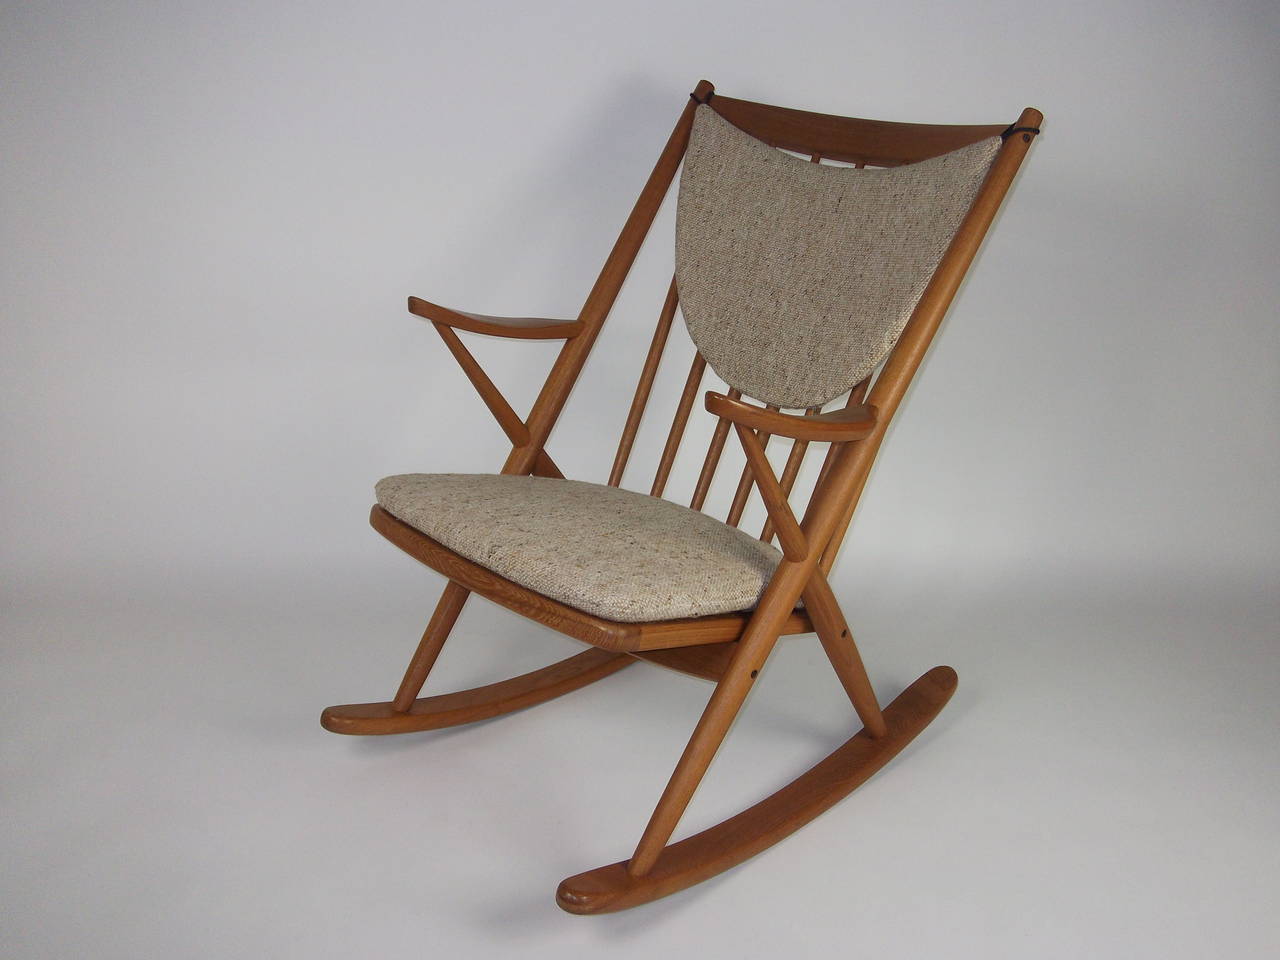 Incredible rocking chair designed by Frank Reenskaug for Brahmin - Denmark - design year 1958 !! One of my favorites for design and comfort!

Very good condition - fabric is original and in good condition - no fading, rips or staining - one could